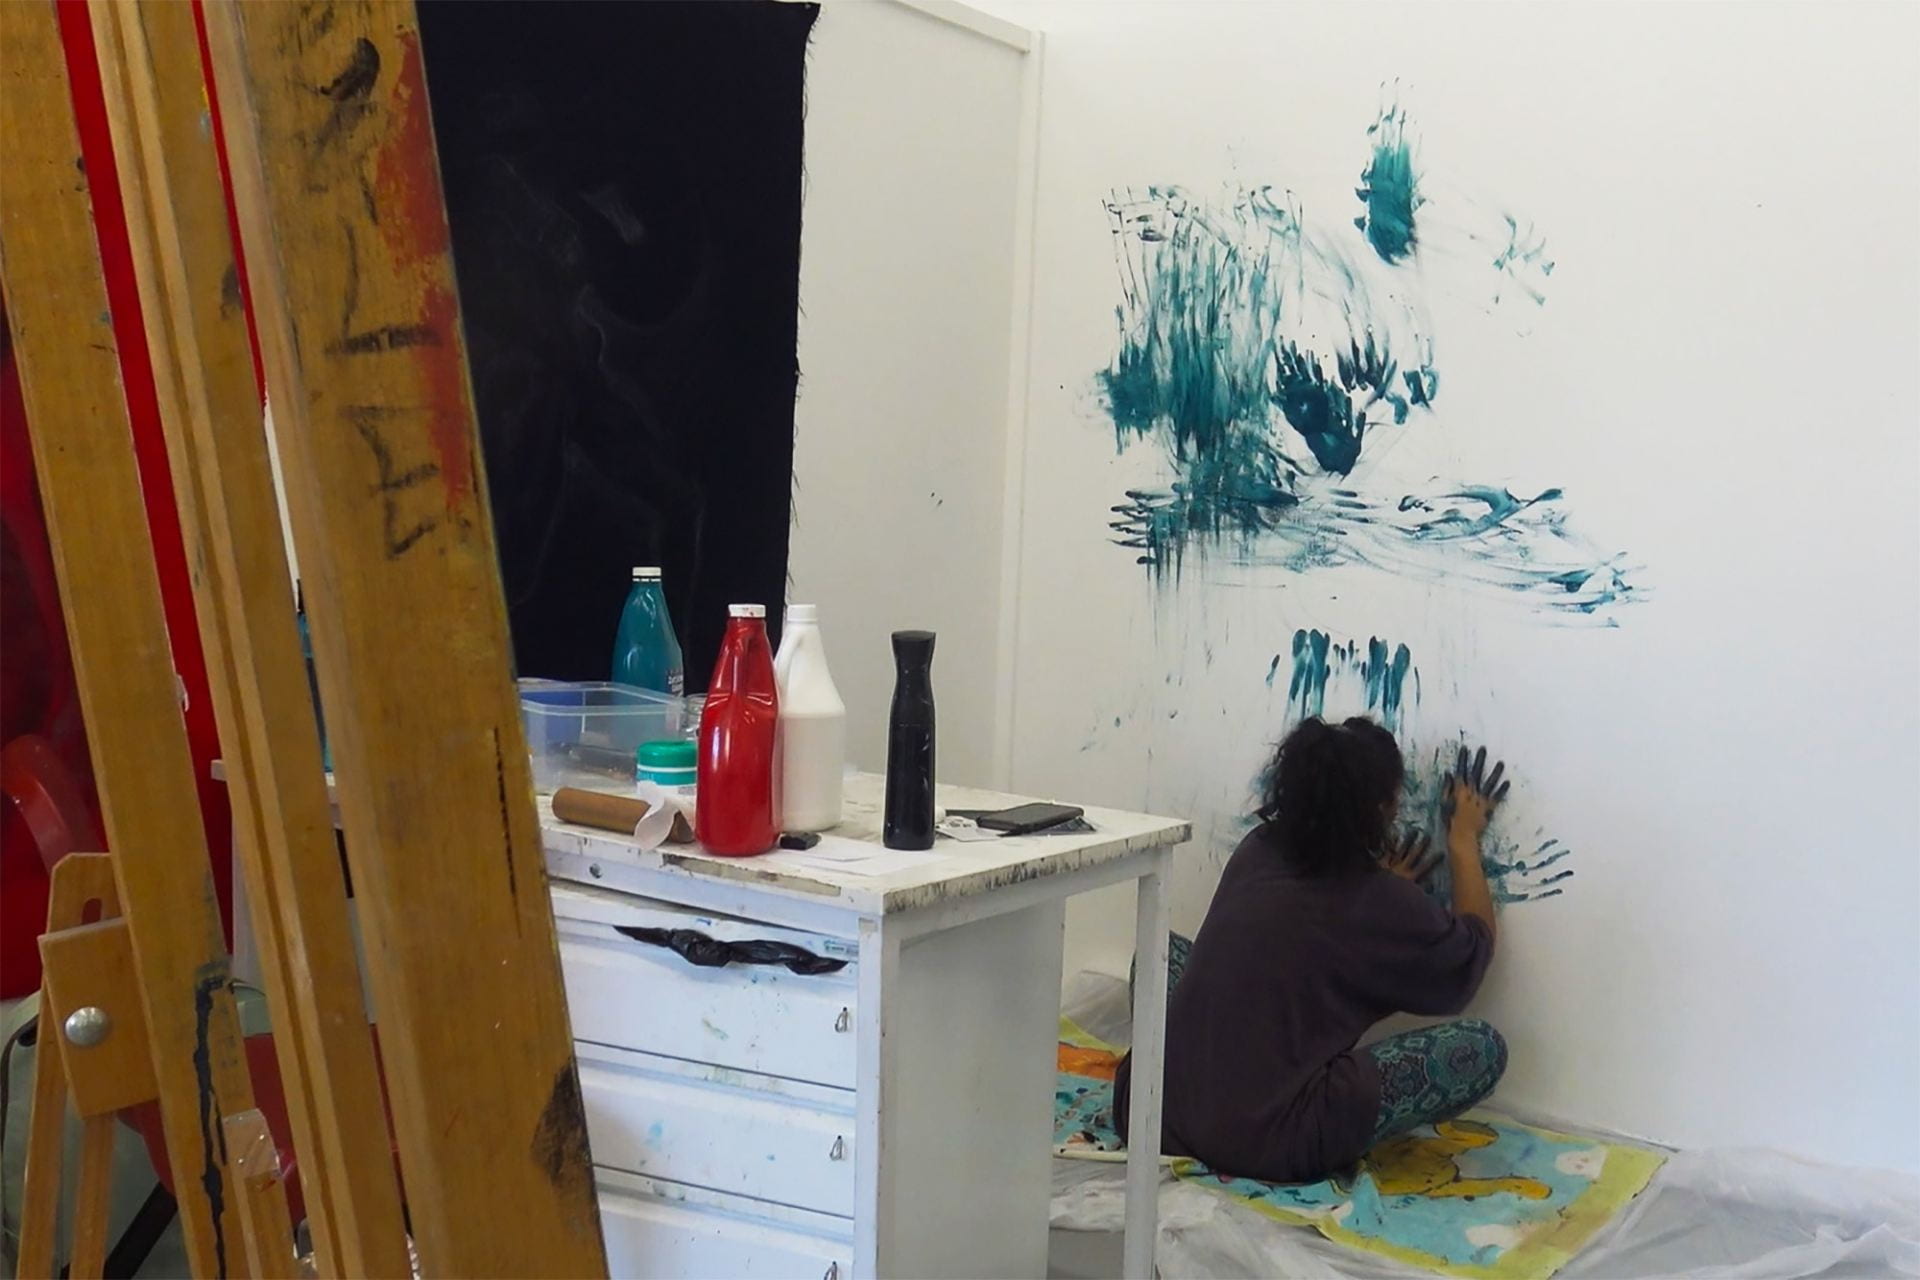 artist sitting on the floor hand painting on the wall with blue acrylic paint